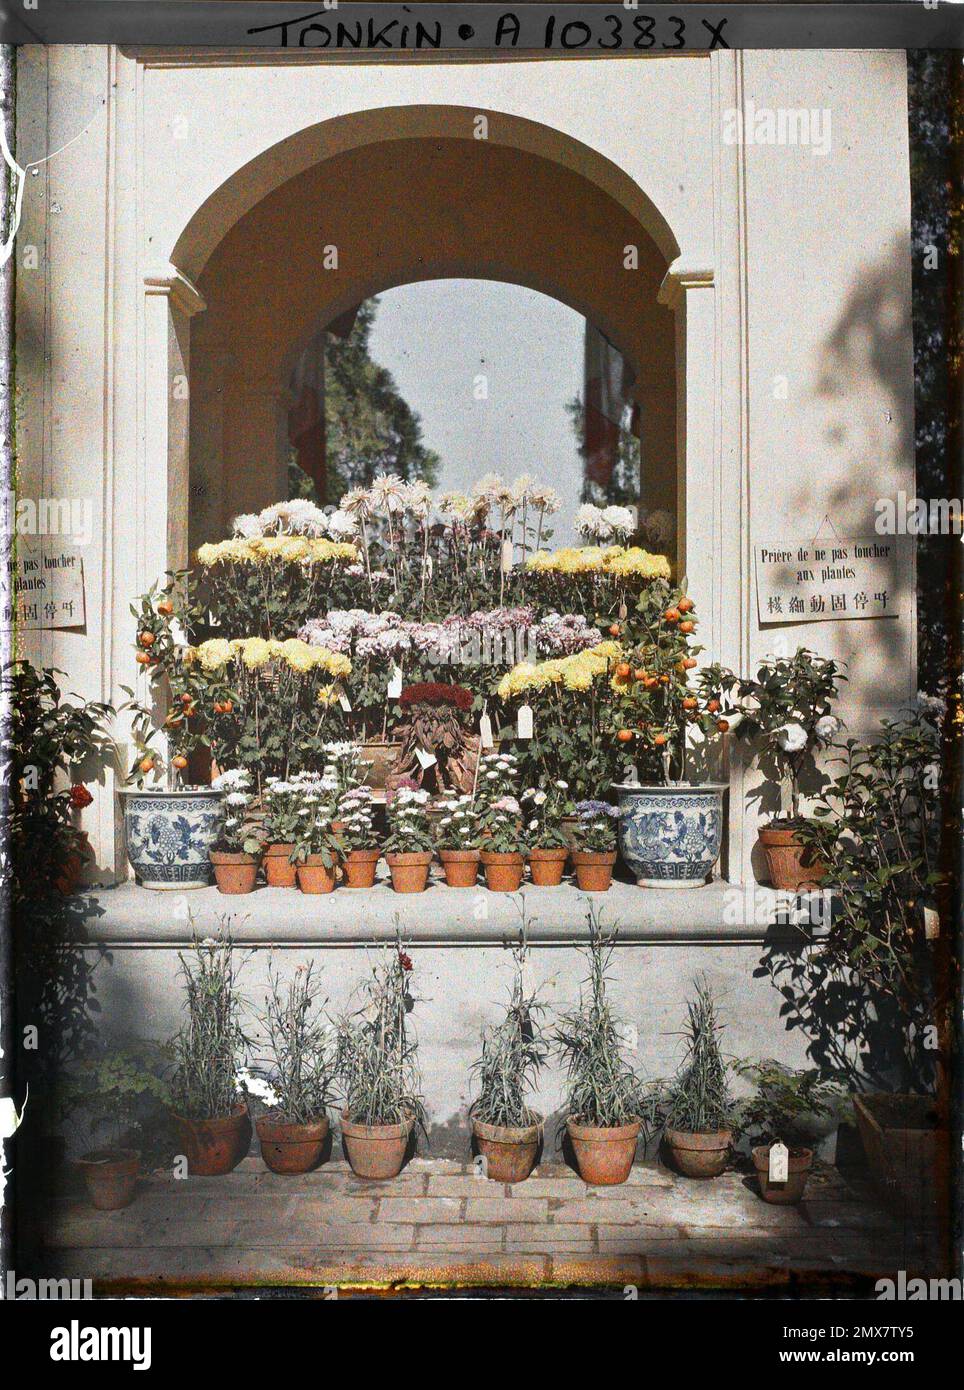 Tonkin, Indochina of chrysanthemums in pots in Floral Exhibition , Léon Busy in Indochina Stock Photo